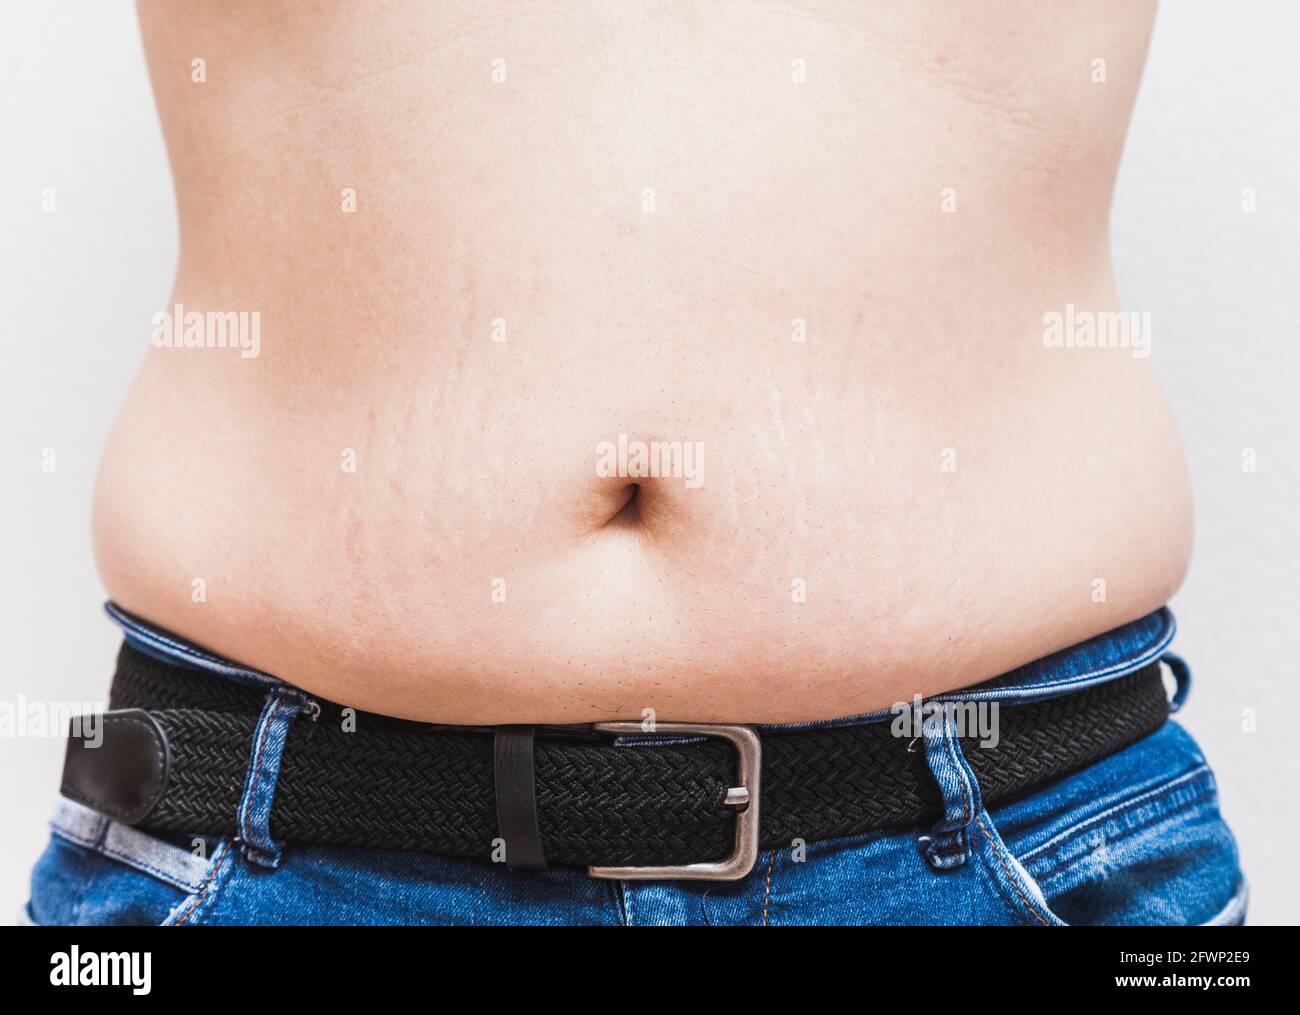 The belly and navel of an unrecognizable fat man wearing blue jeans and a black belt Stock Photo